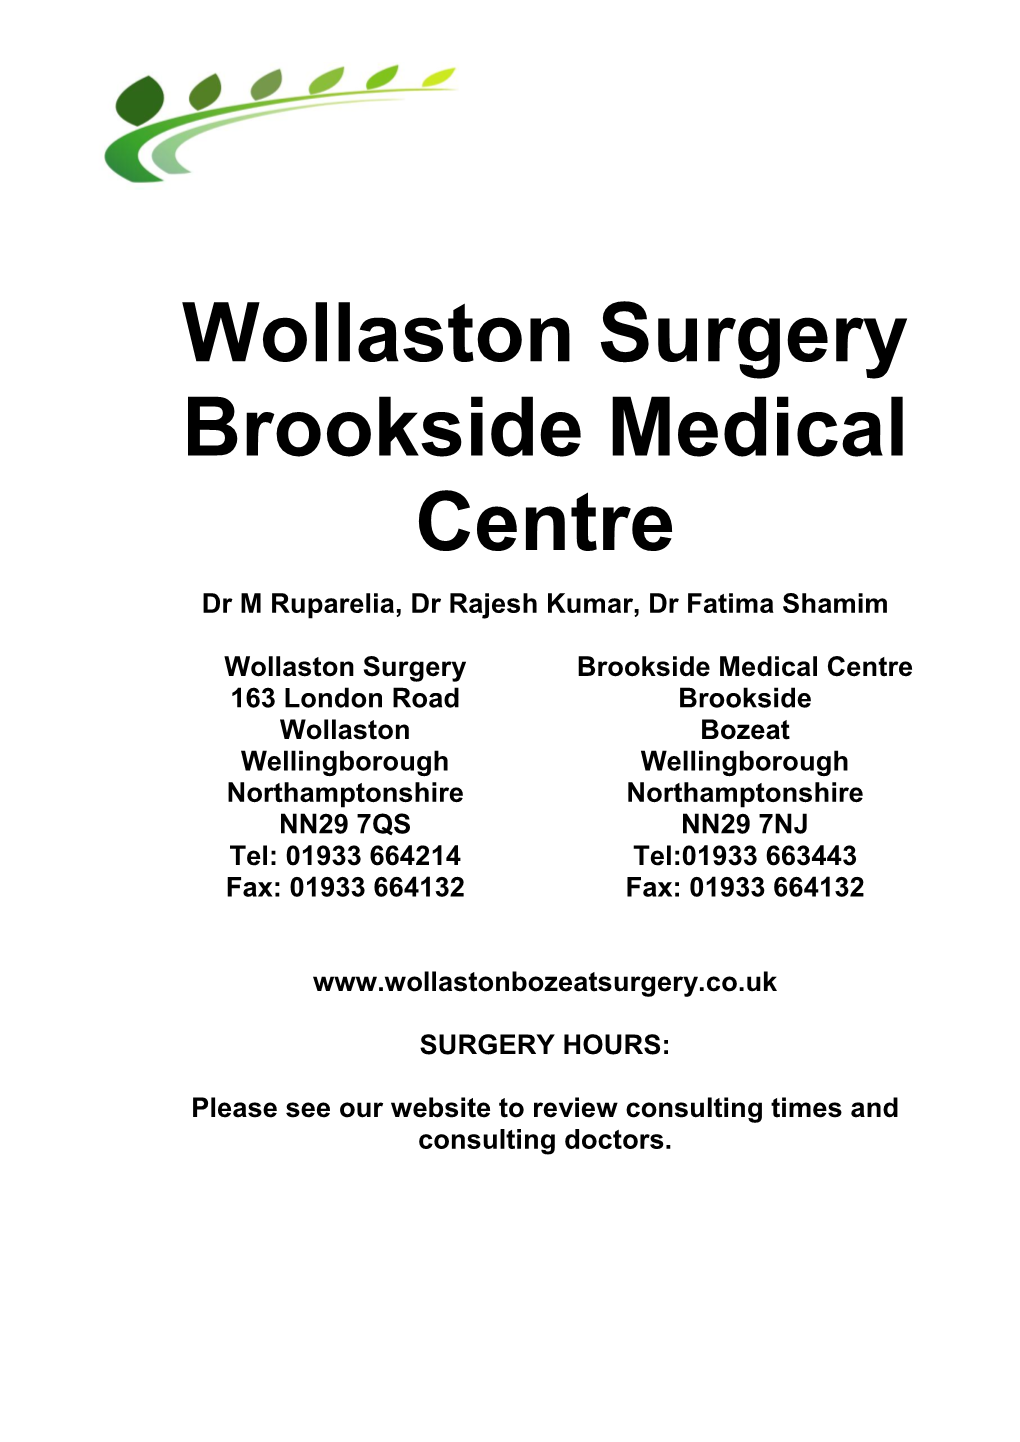 Wollaston Surgery Brookside Medical Centre